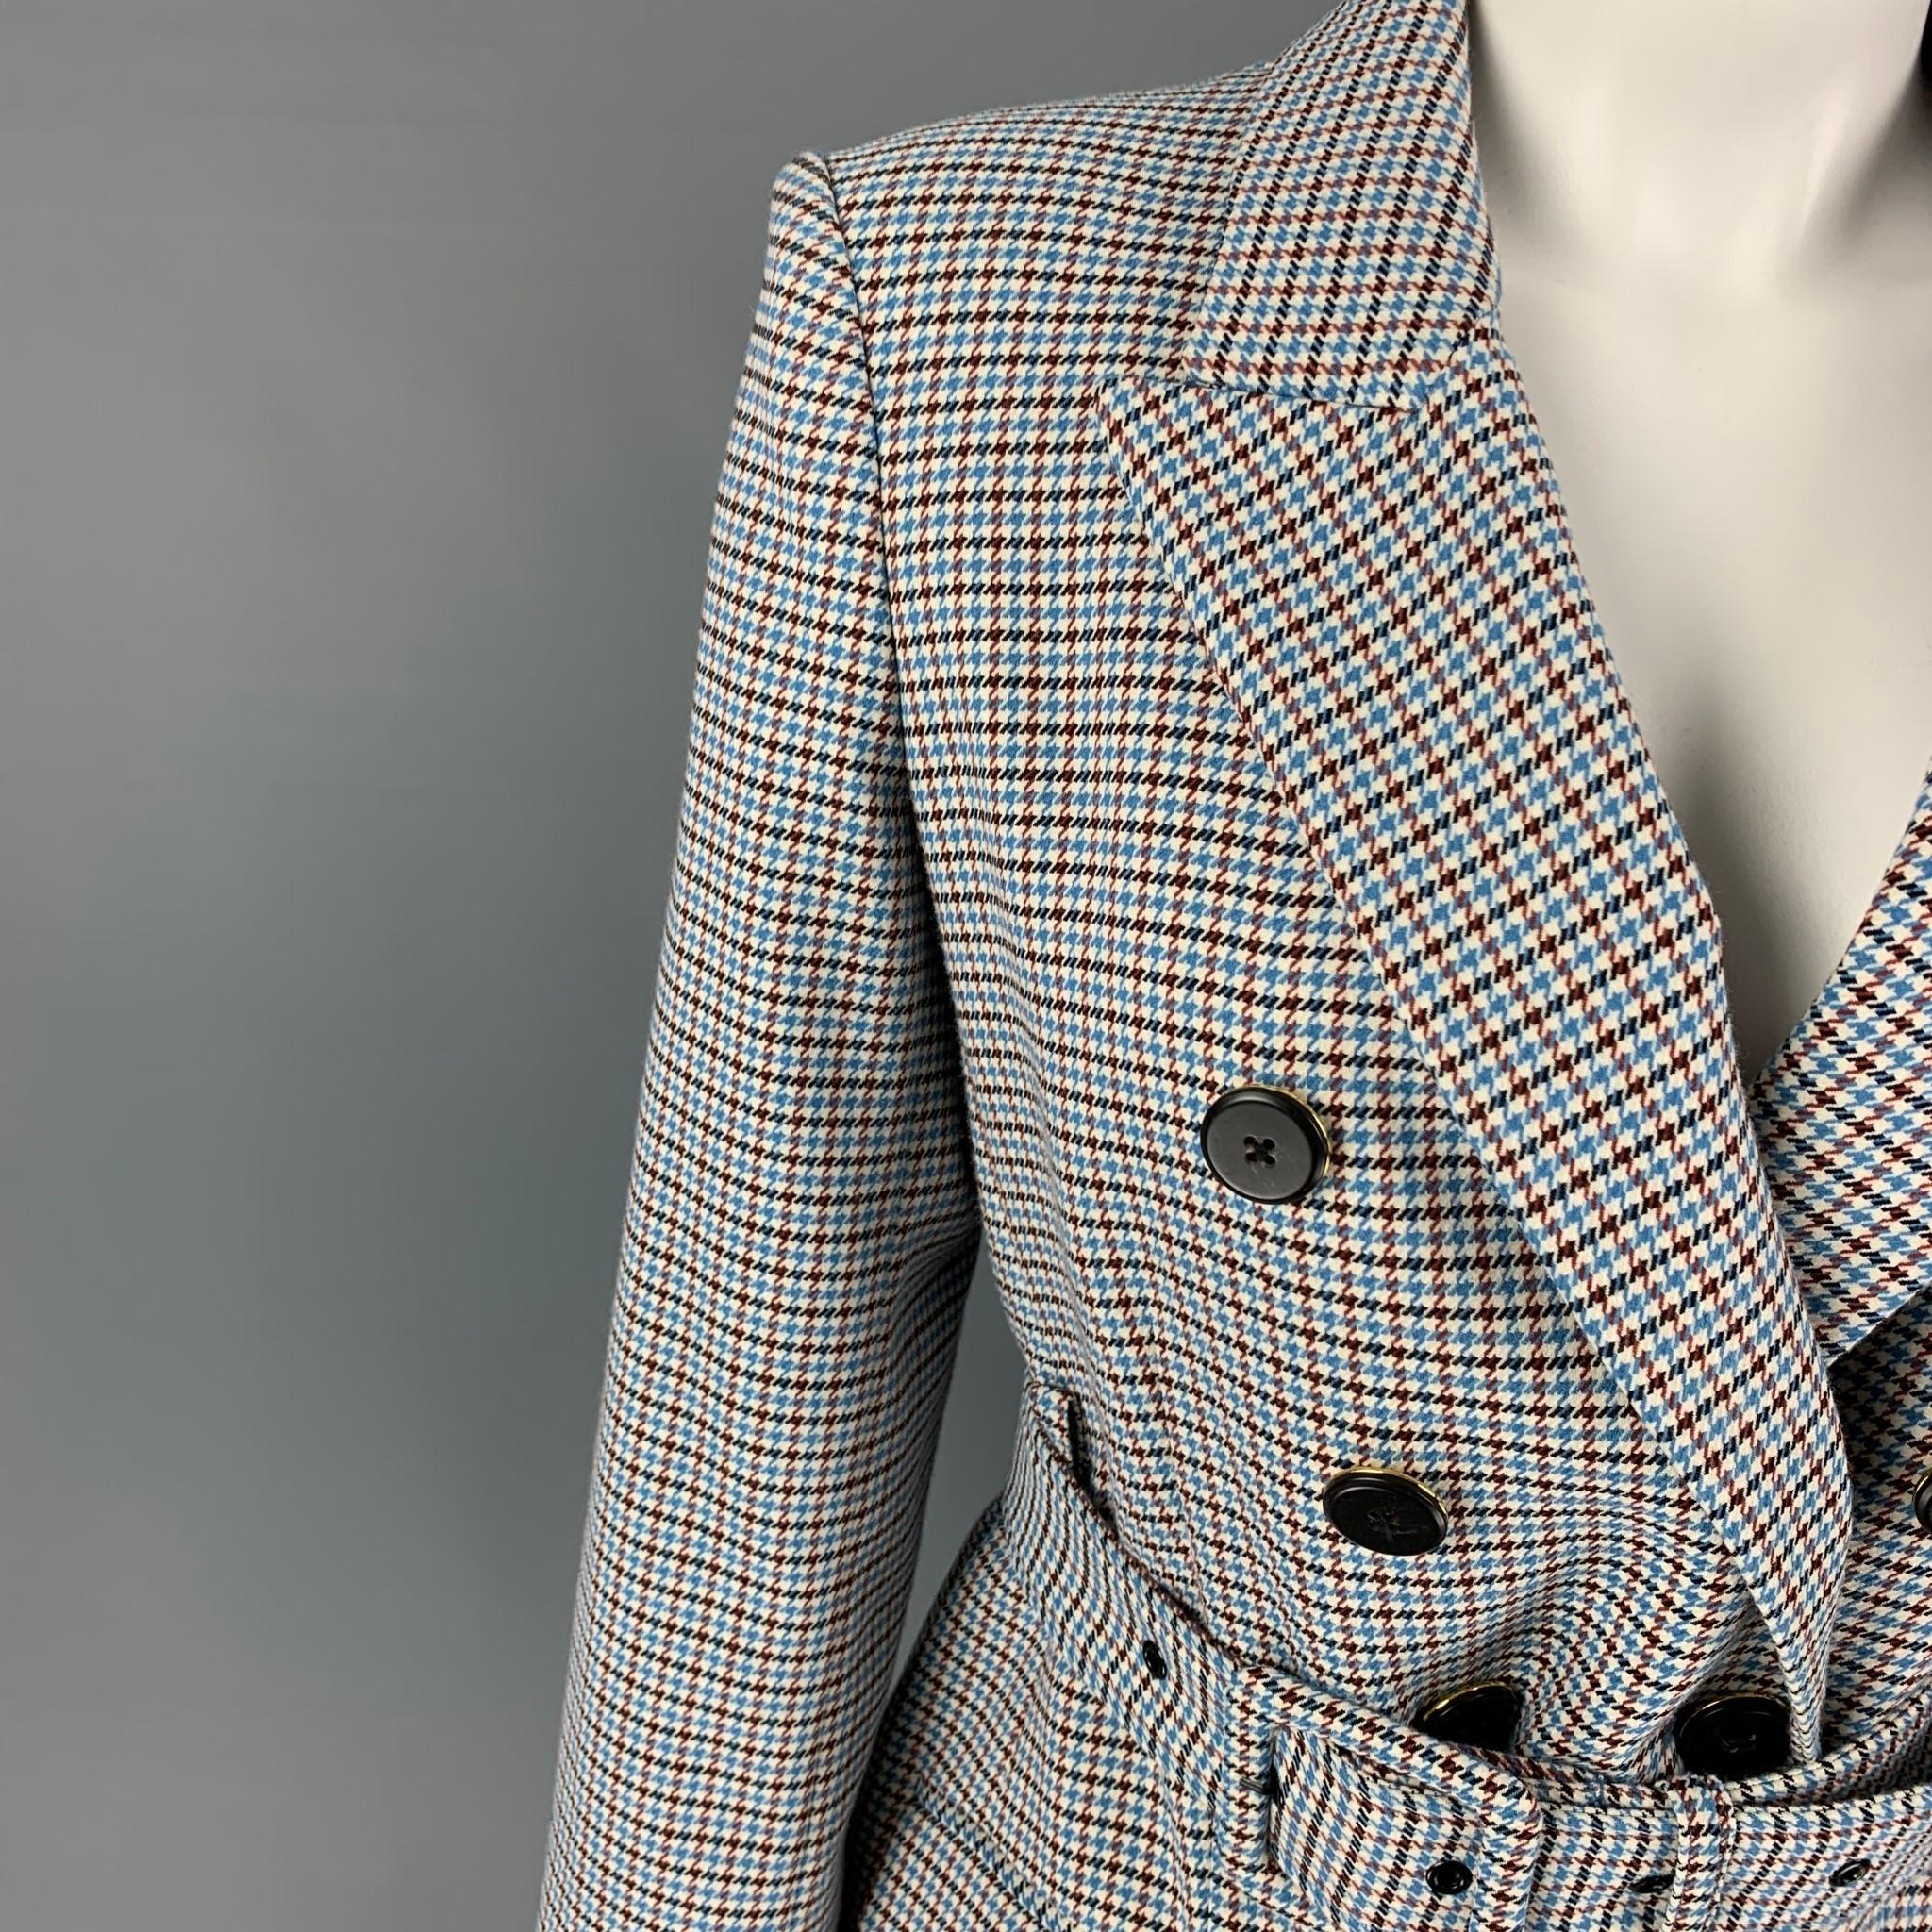 VERONICA BEARD jacket comes in a blue & cream houndstooth polyester blend with a full liner featuring a peak lapel, belted, flap pockets, single back vent, and a double breasted closure. Made in USA. 

Excellent Pre-Owned Condition.
Marked: